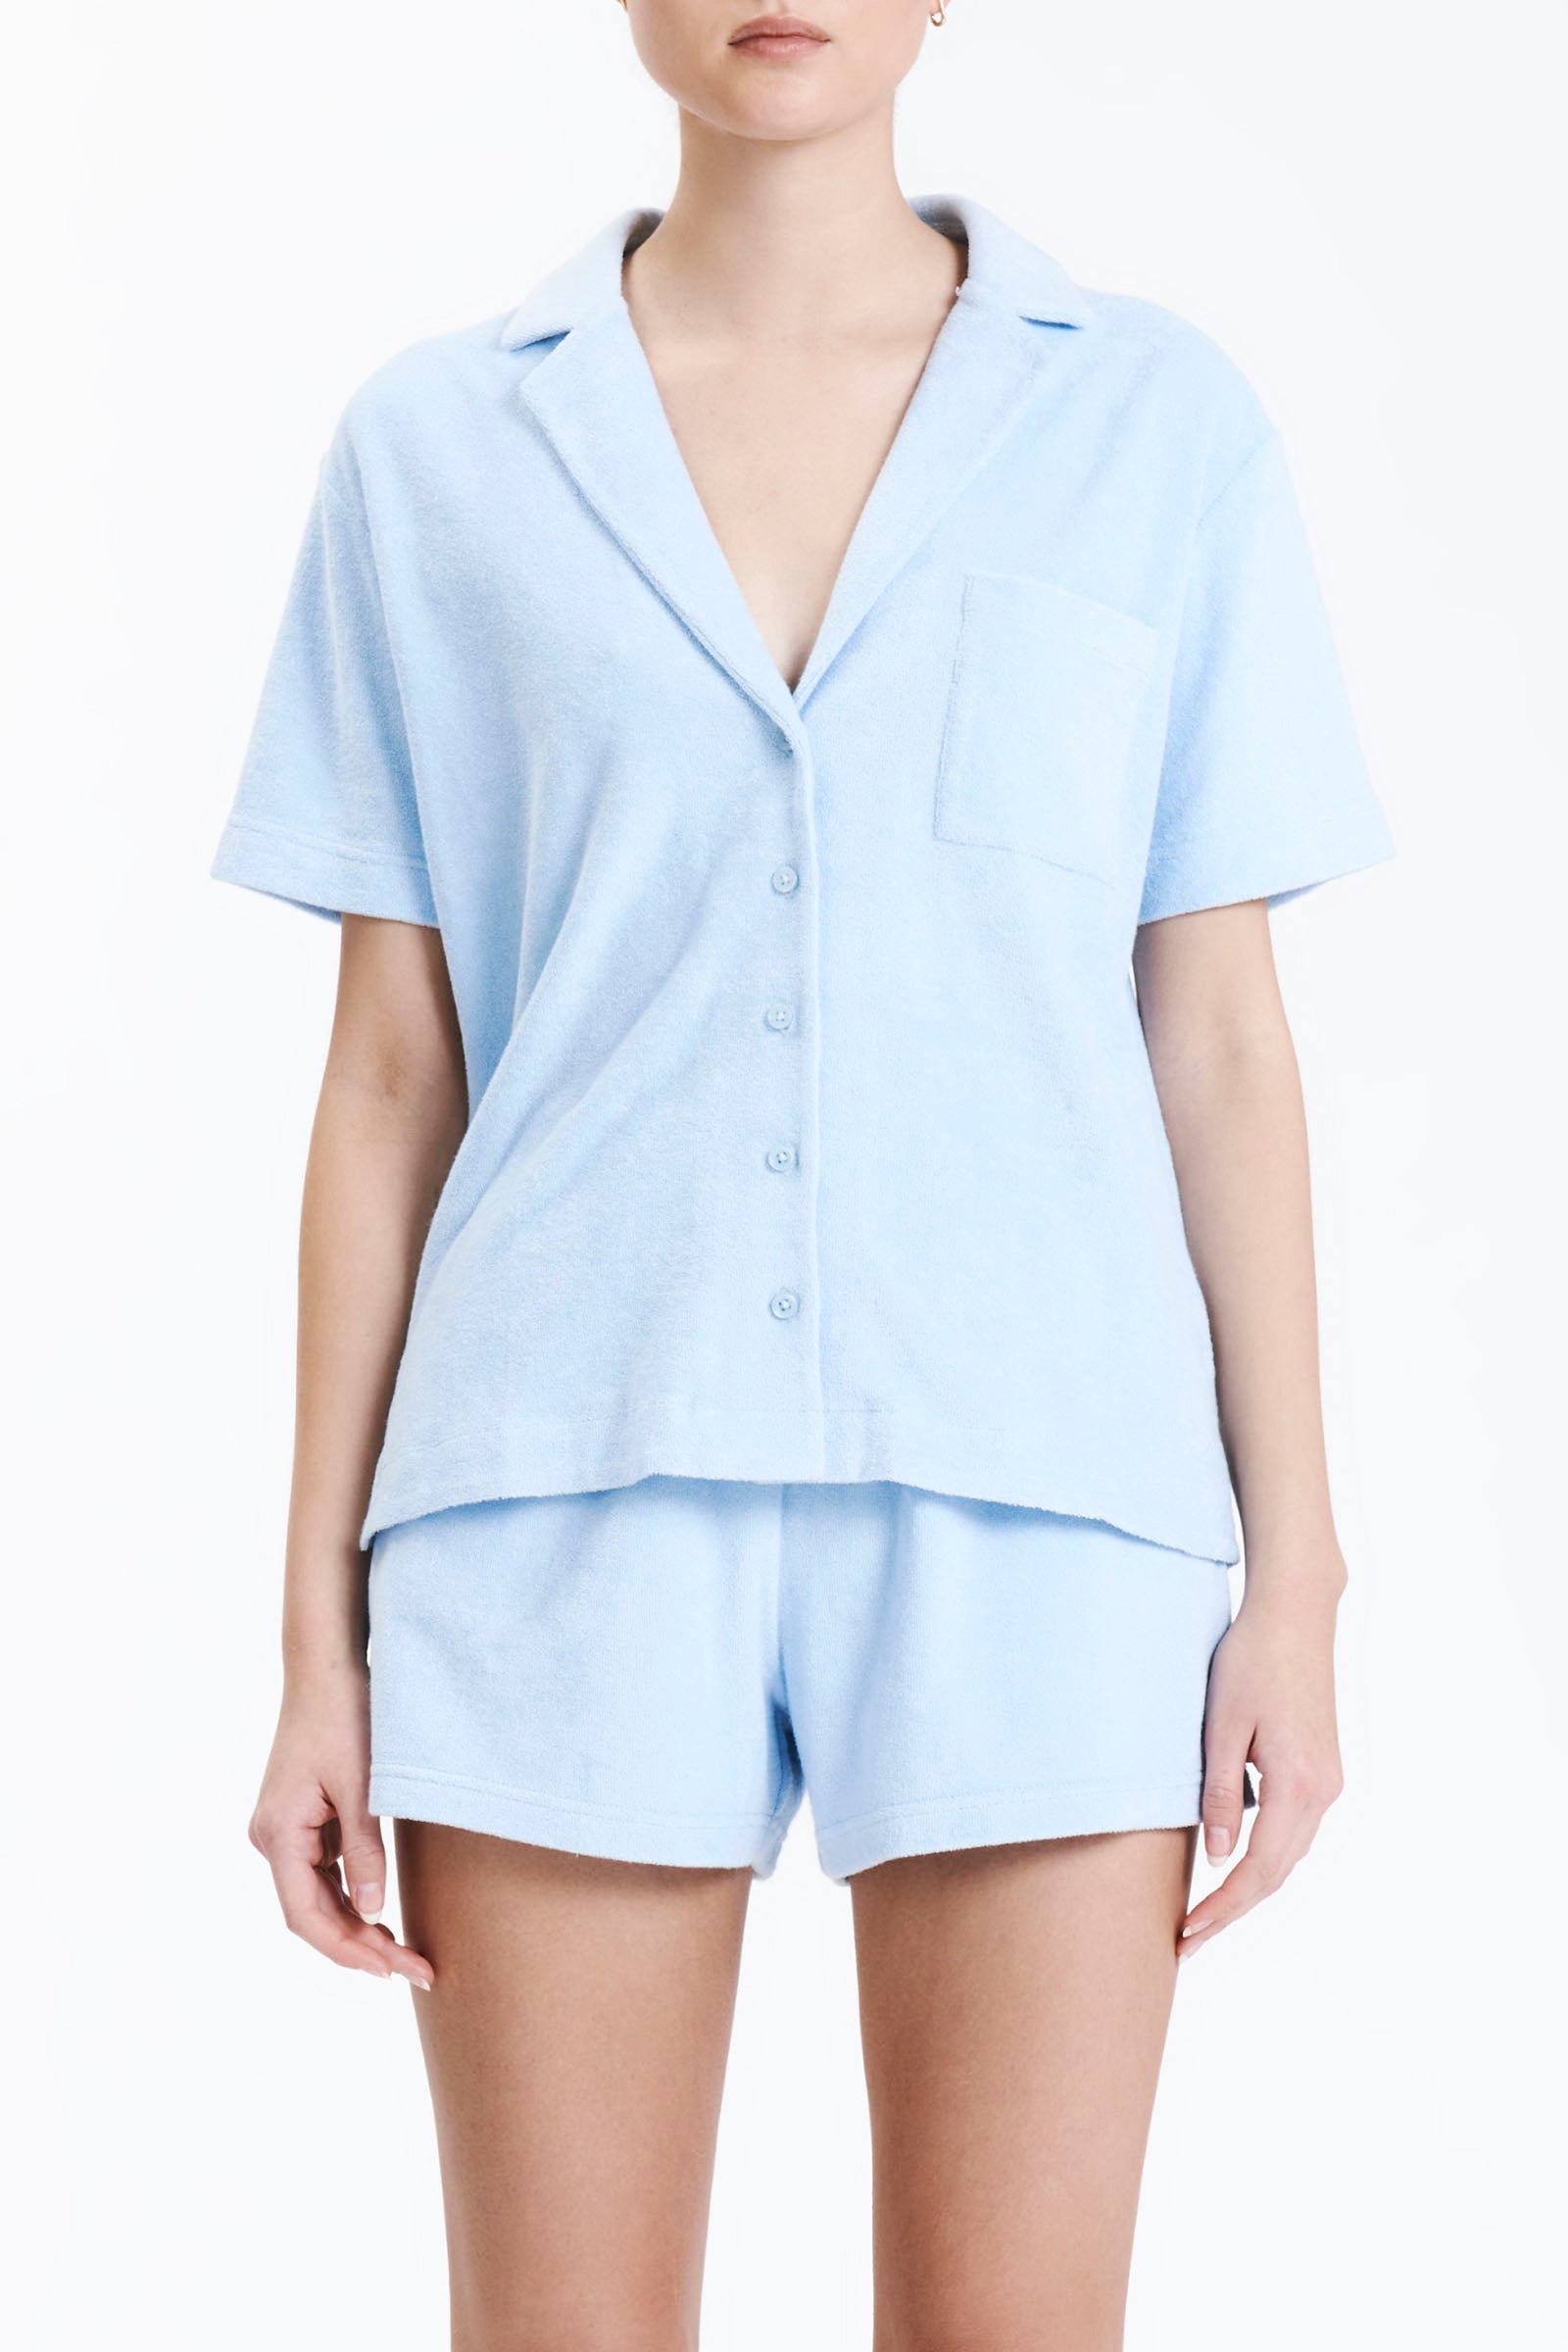 Nude Lucy Inka Terry Shirt in a Blue Sky Colour